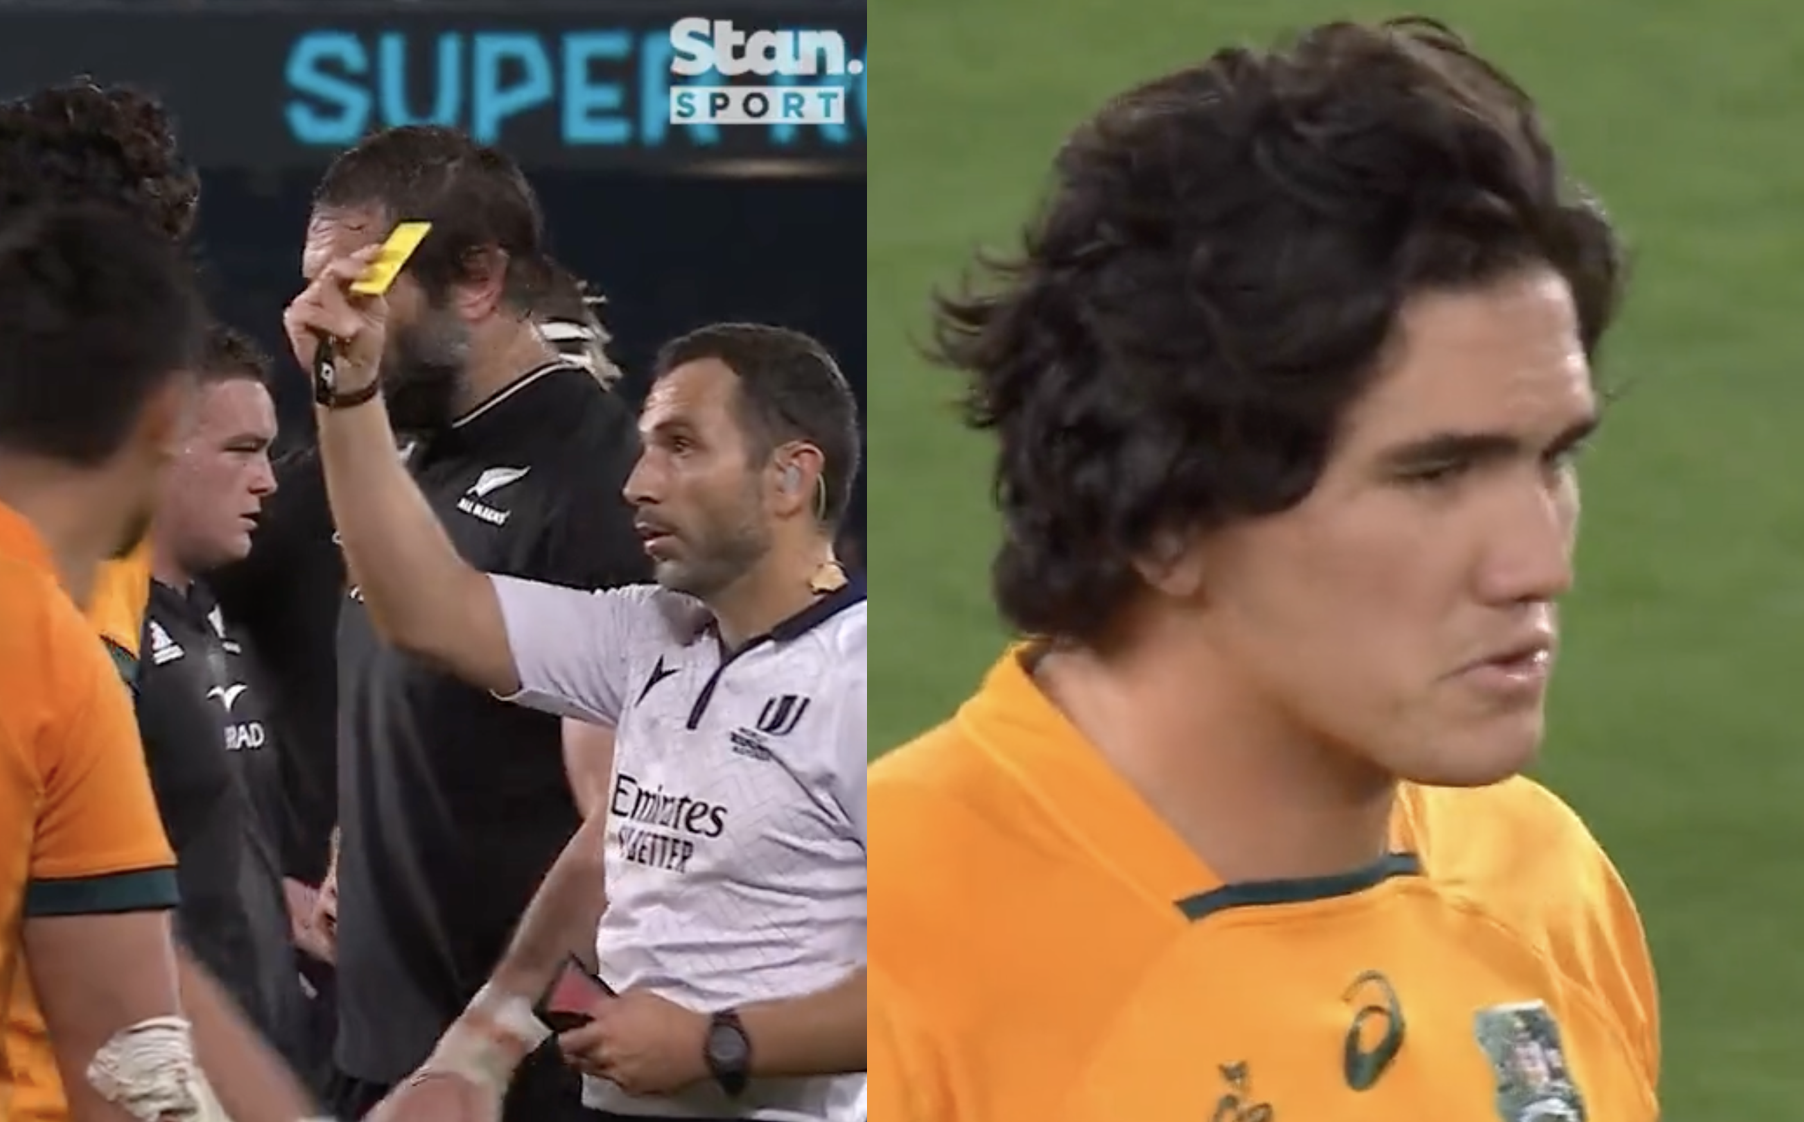 Rugby world cannot believe Wallaby was not red carded for 'dog act'